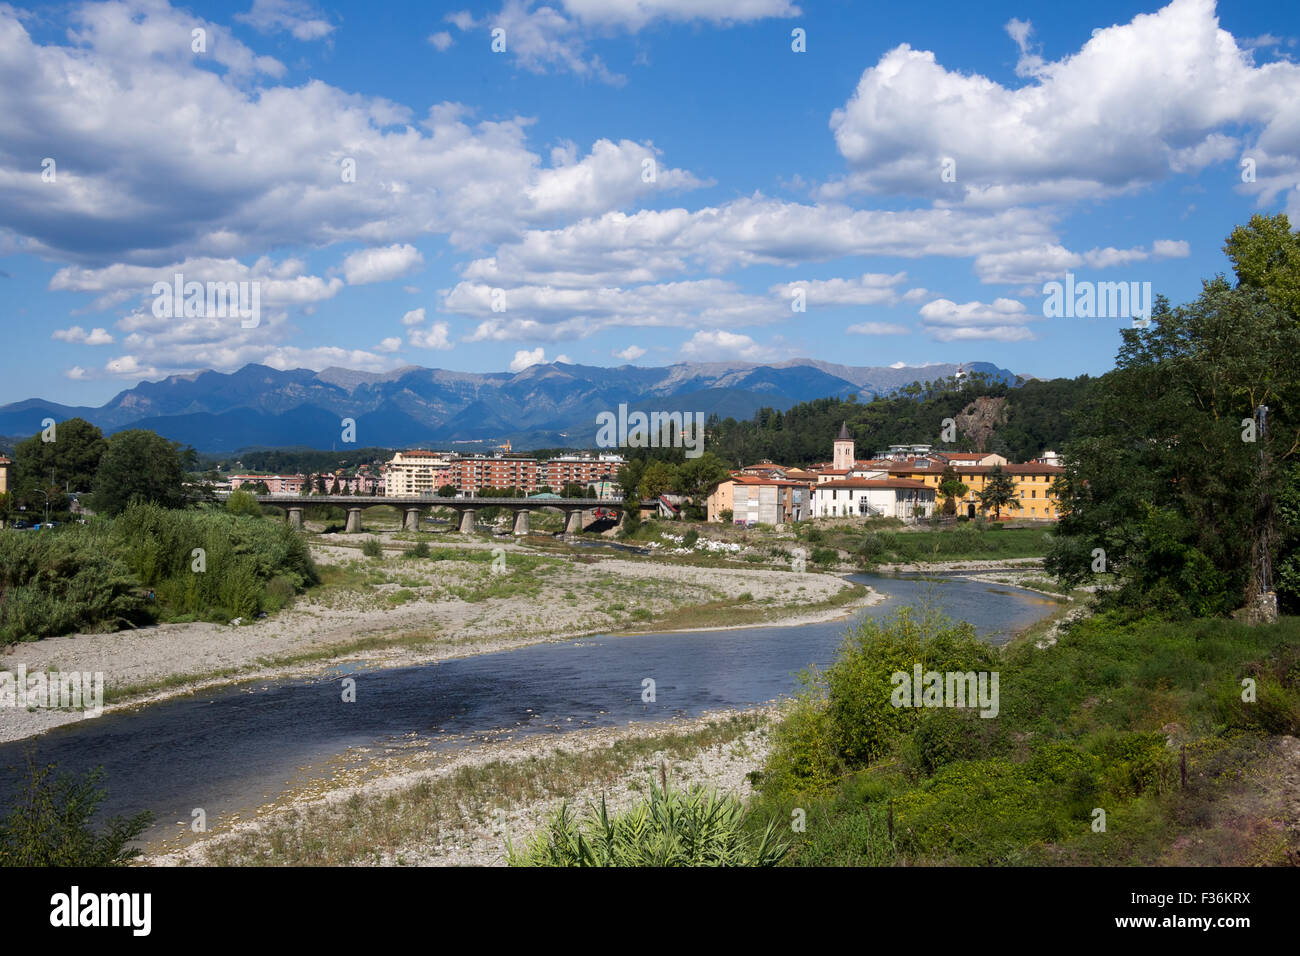 Aulla town with river Magra in the foreground and Apennine mountains behind. Lunigiana, north Tuscany, Italy. Stock Photo